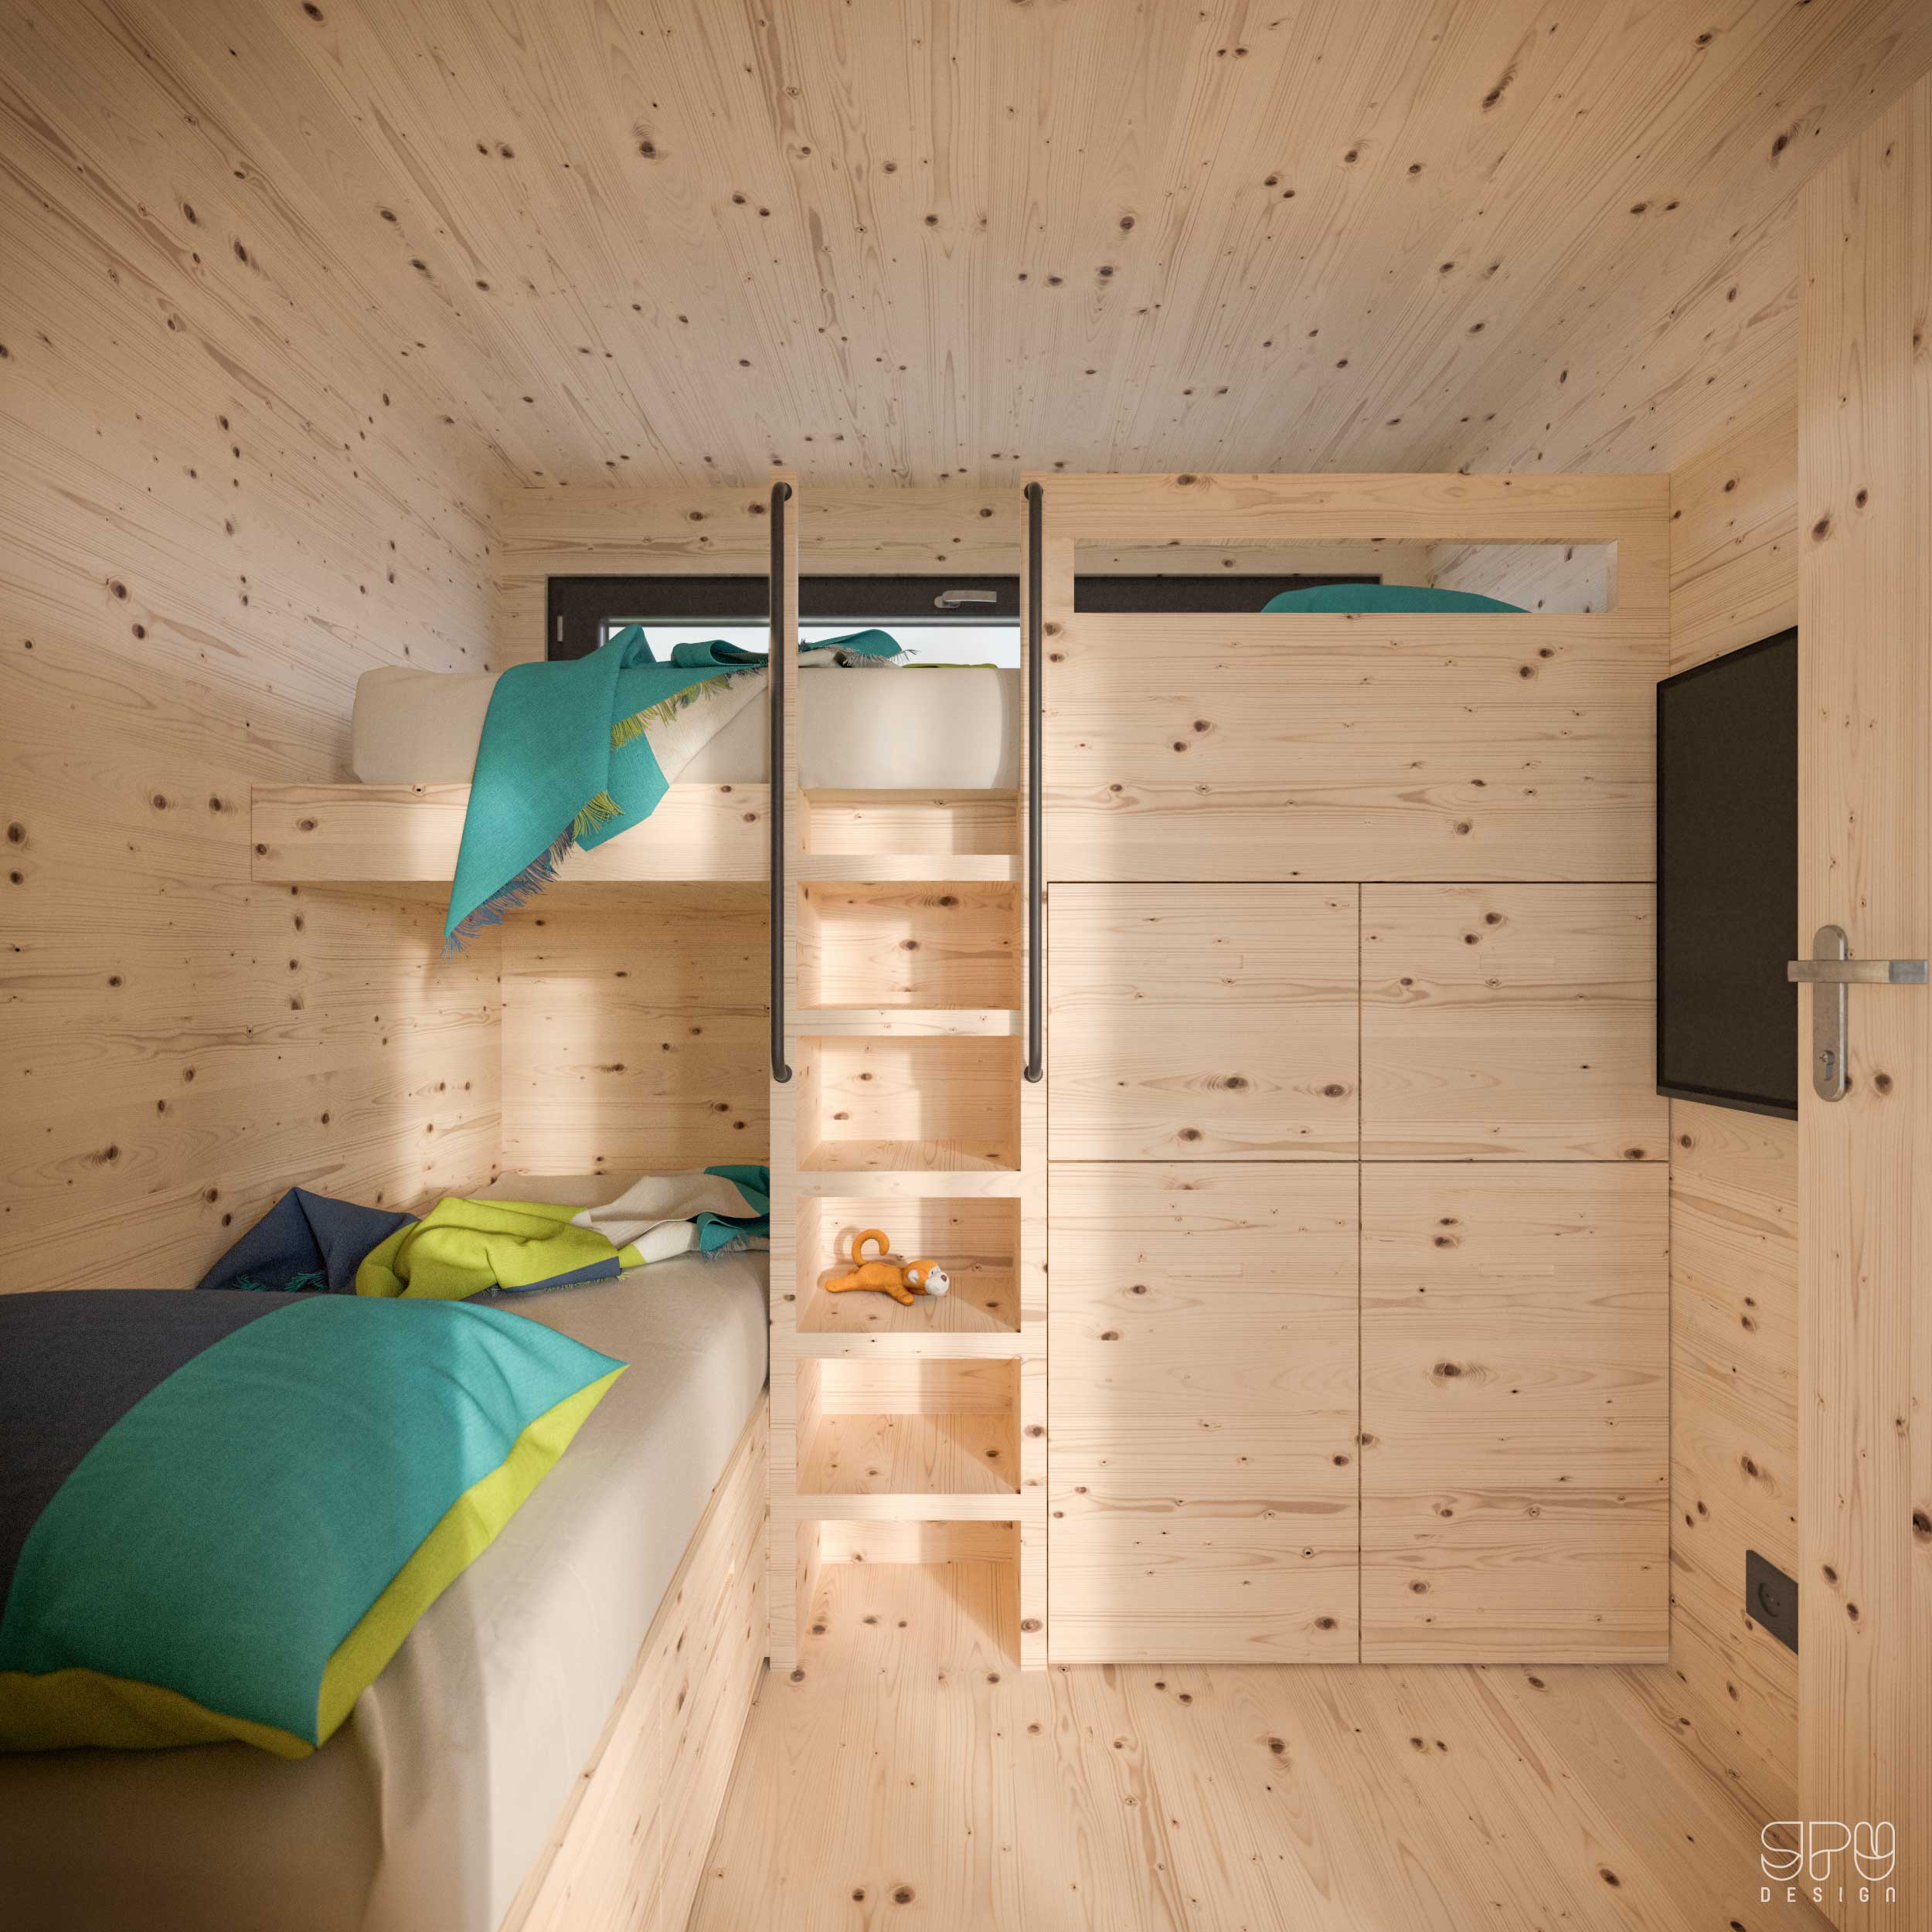 Mobile tiny house by GPU Design